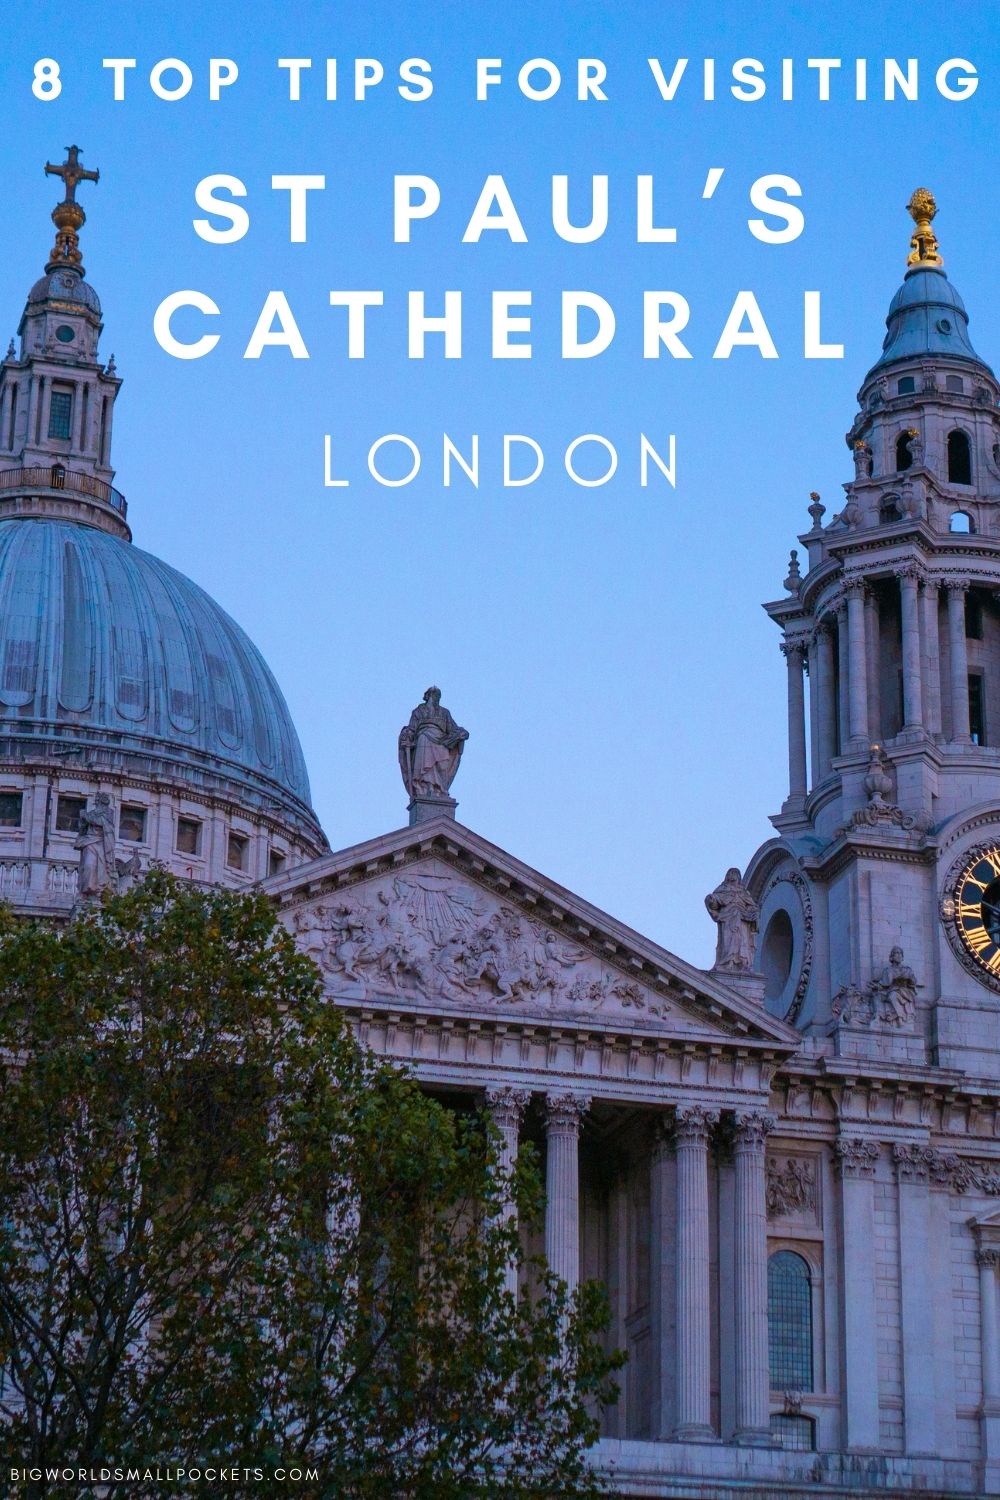 8 Top Tips for Visiting St Paul’s Cathedral in London